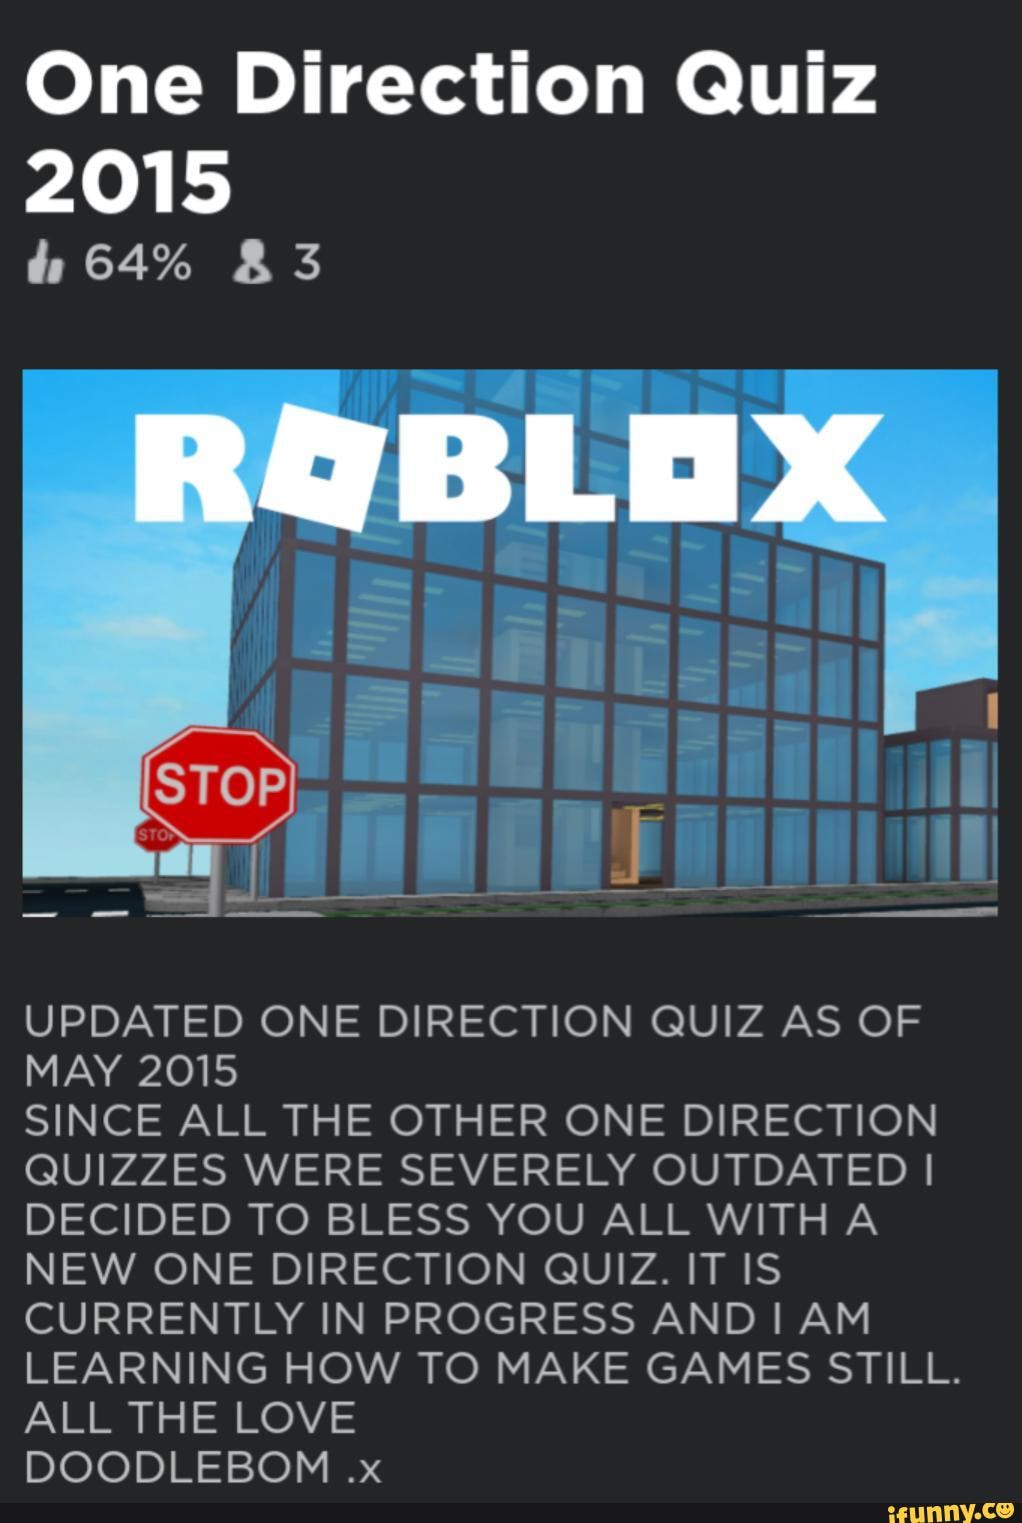 One Direction Quiz 2015 Updated One Direction Quiz As Of May 2015 Since All The Other One Direction Quizzes Were Severely Outdated I Decided To Bless You All Witha New One Direction - one direction roblox games